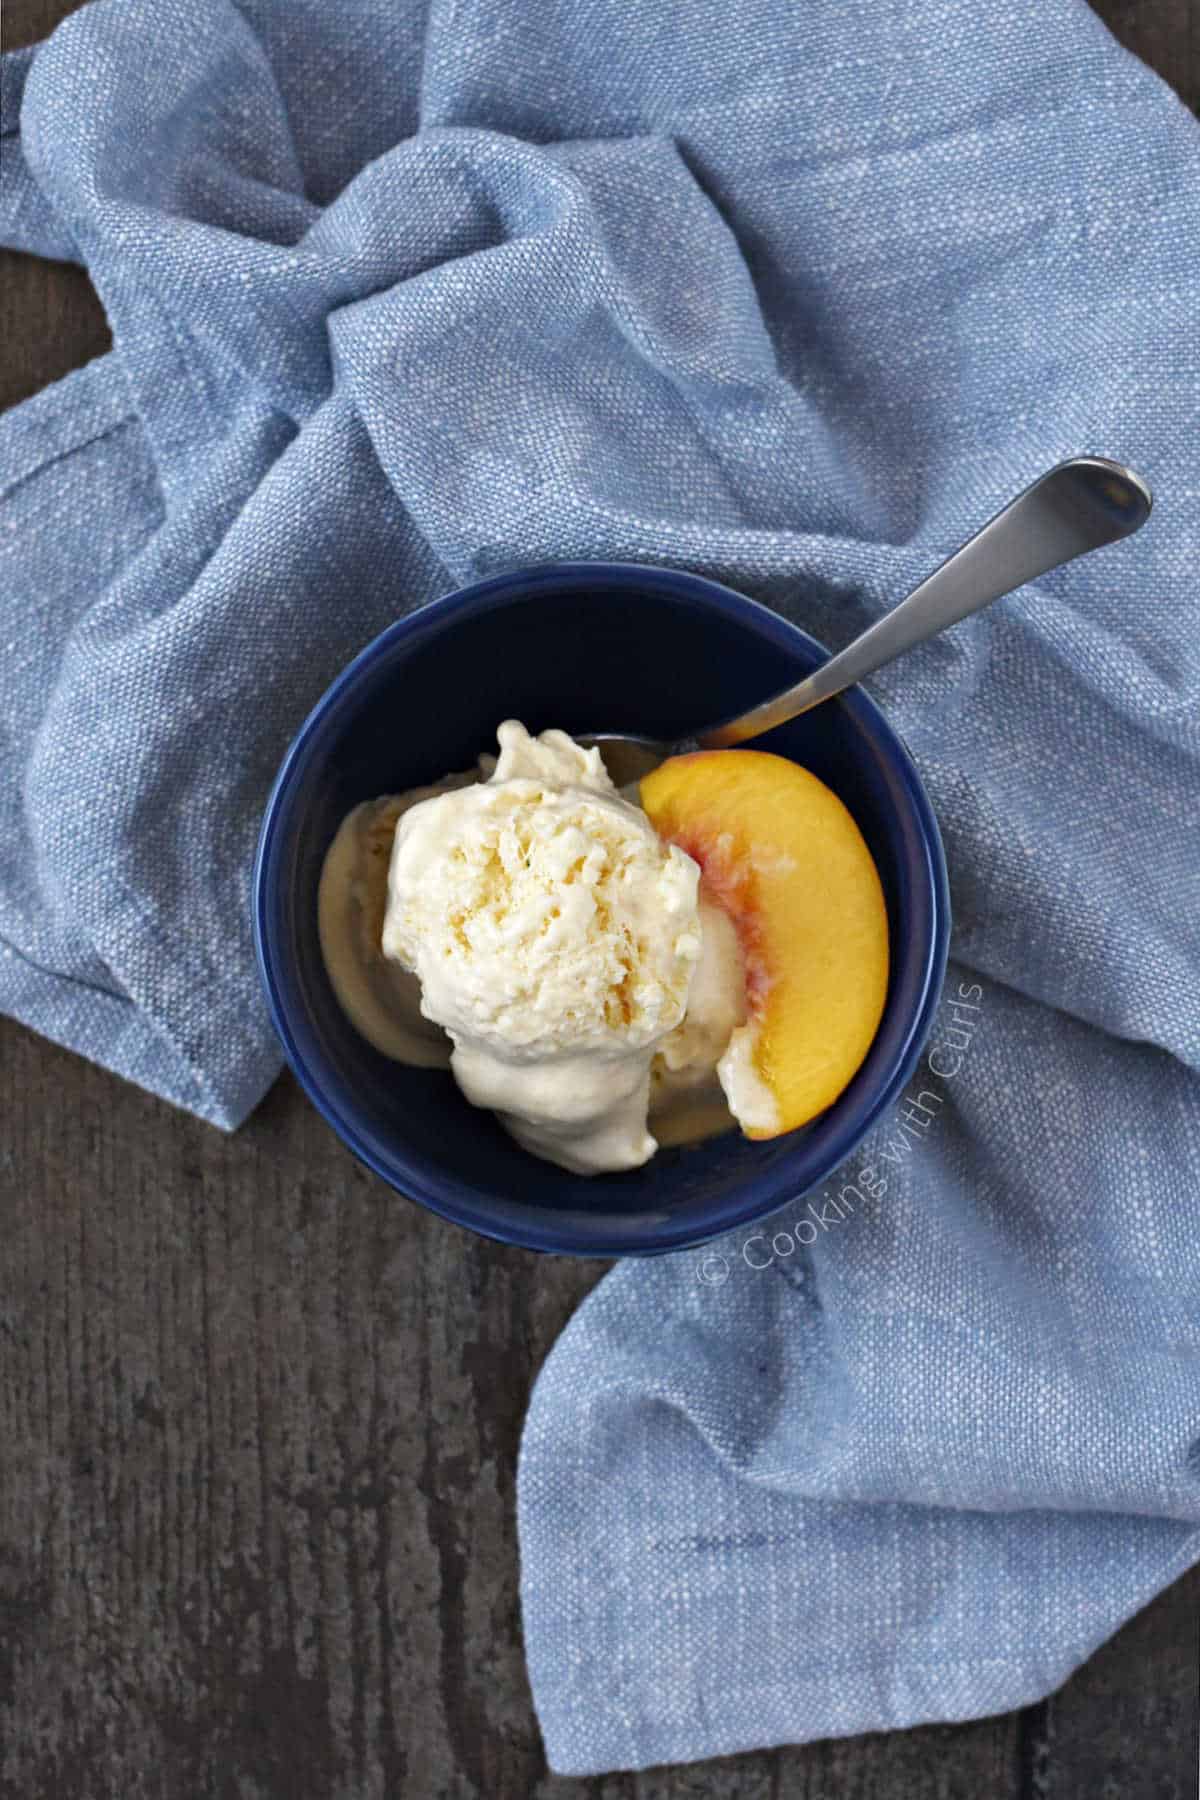 Looking down on a bowl of peach ice cream with a peach slice and spoon on the side.